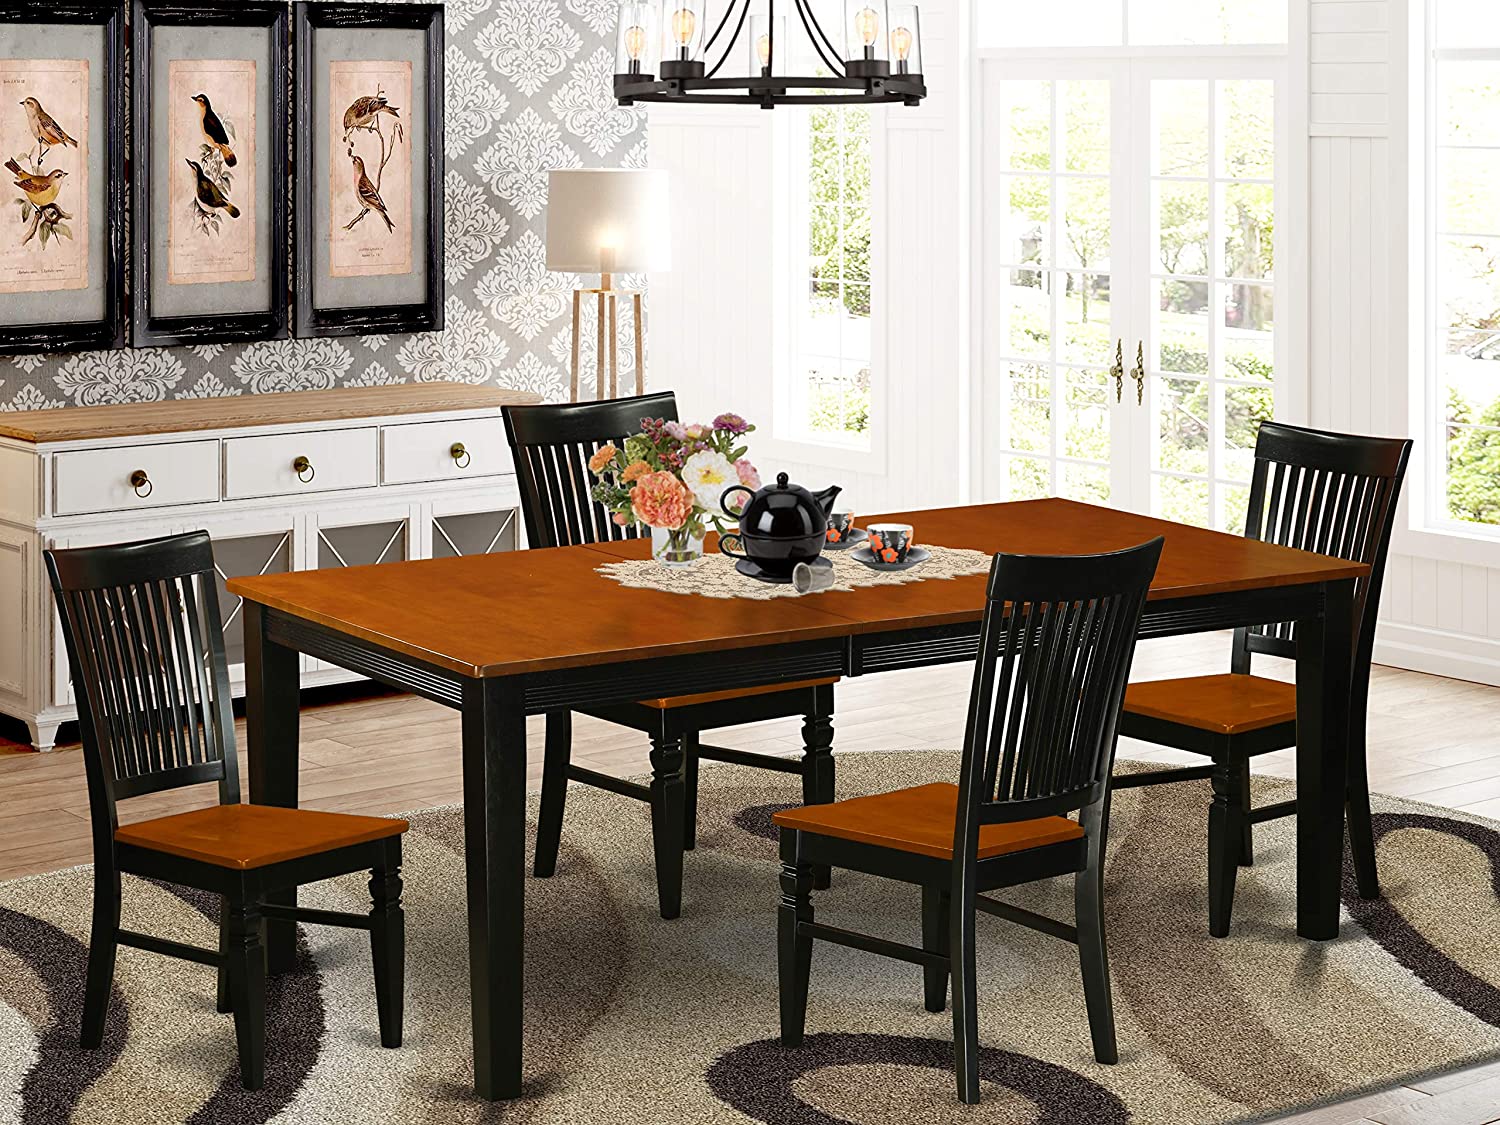 Black and Wooden Toned Dining Set 